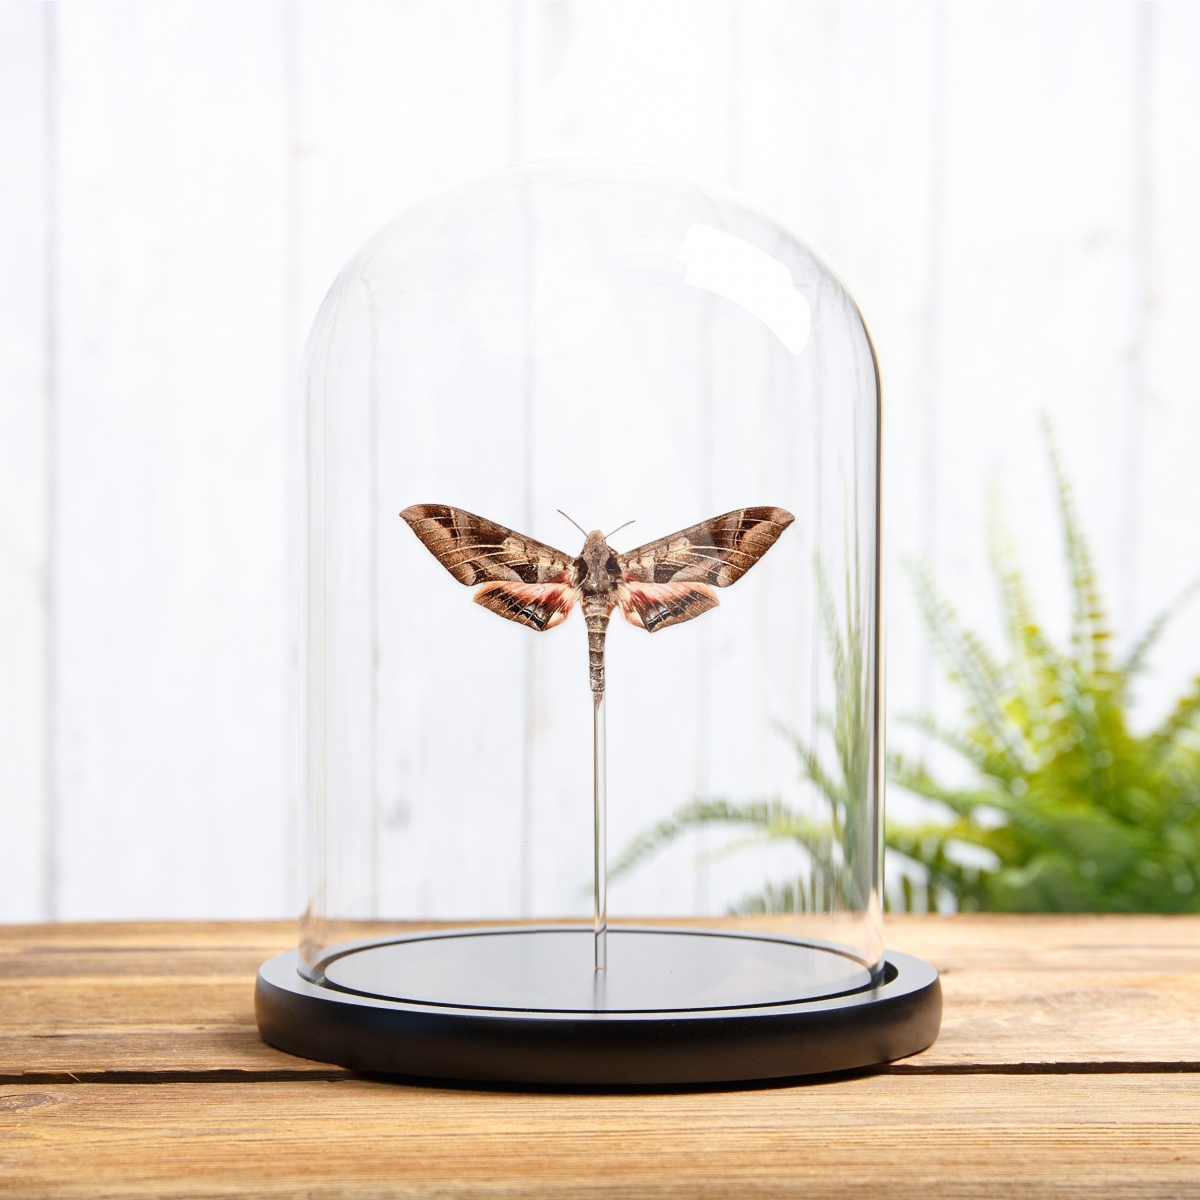 Minibeast Typhon sphinx in Glass Dome with Wooden Base (Eumorpha typhon)